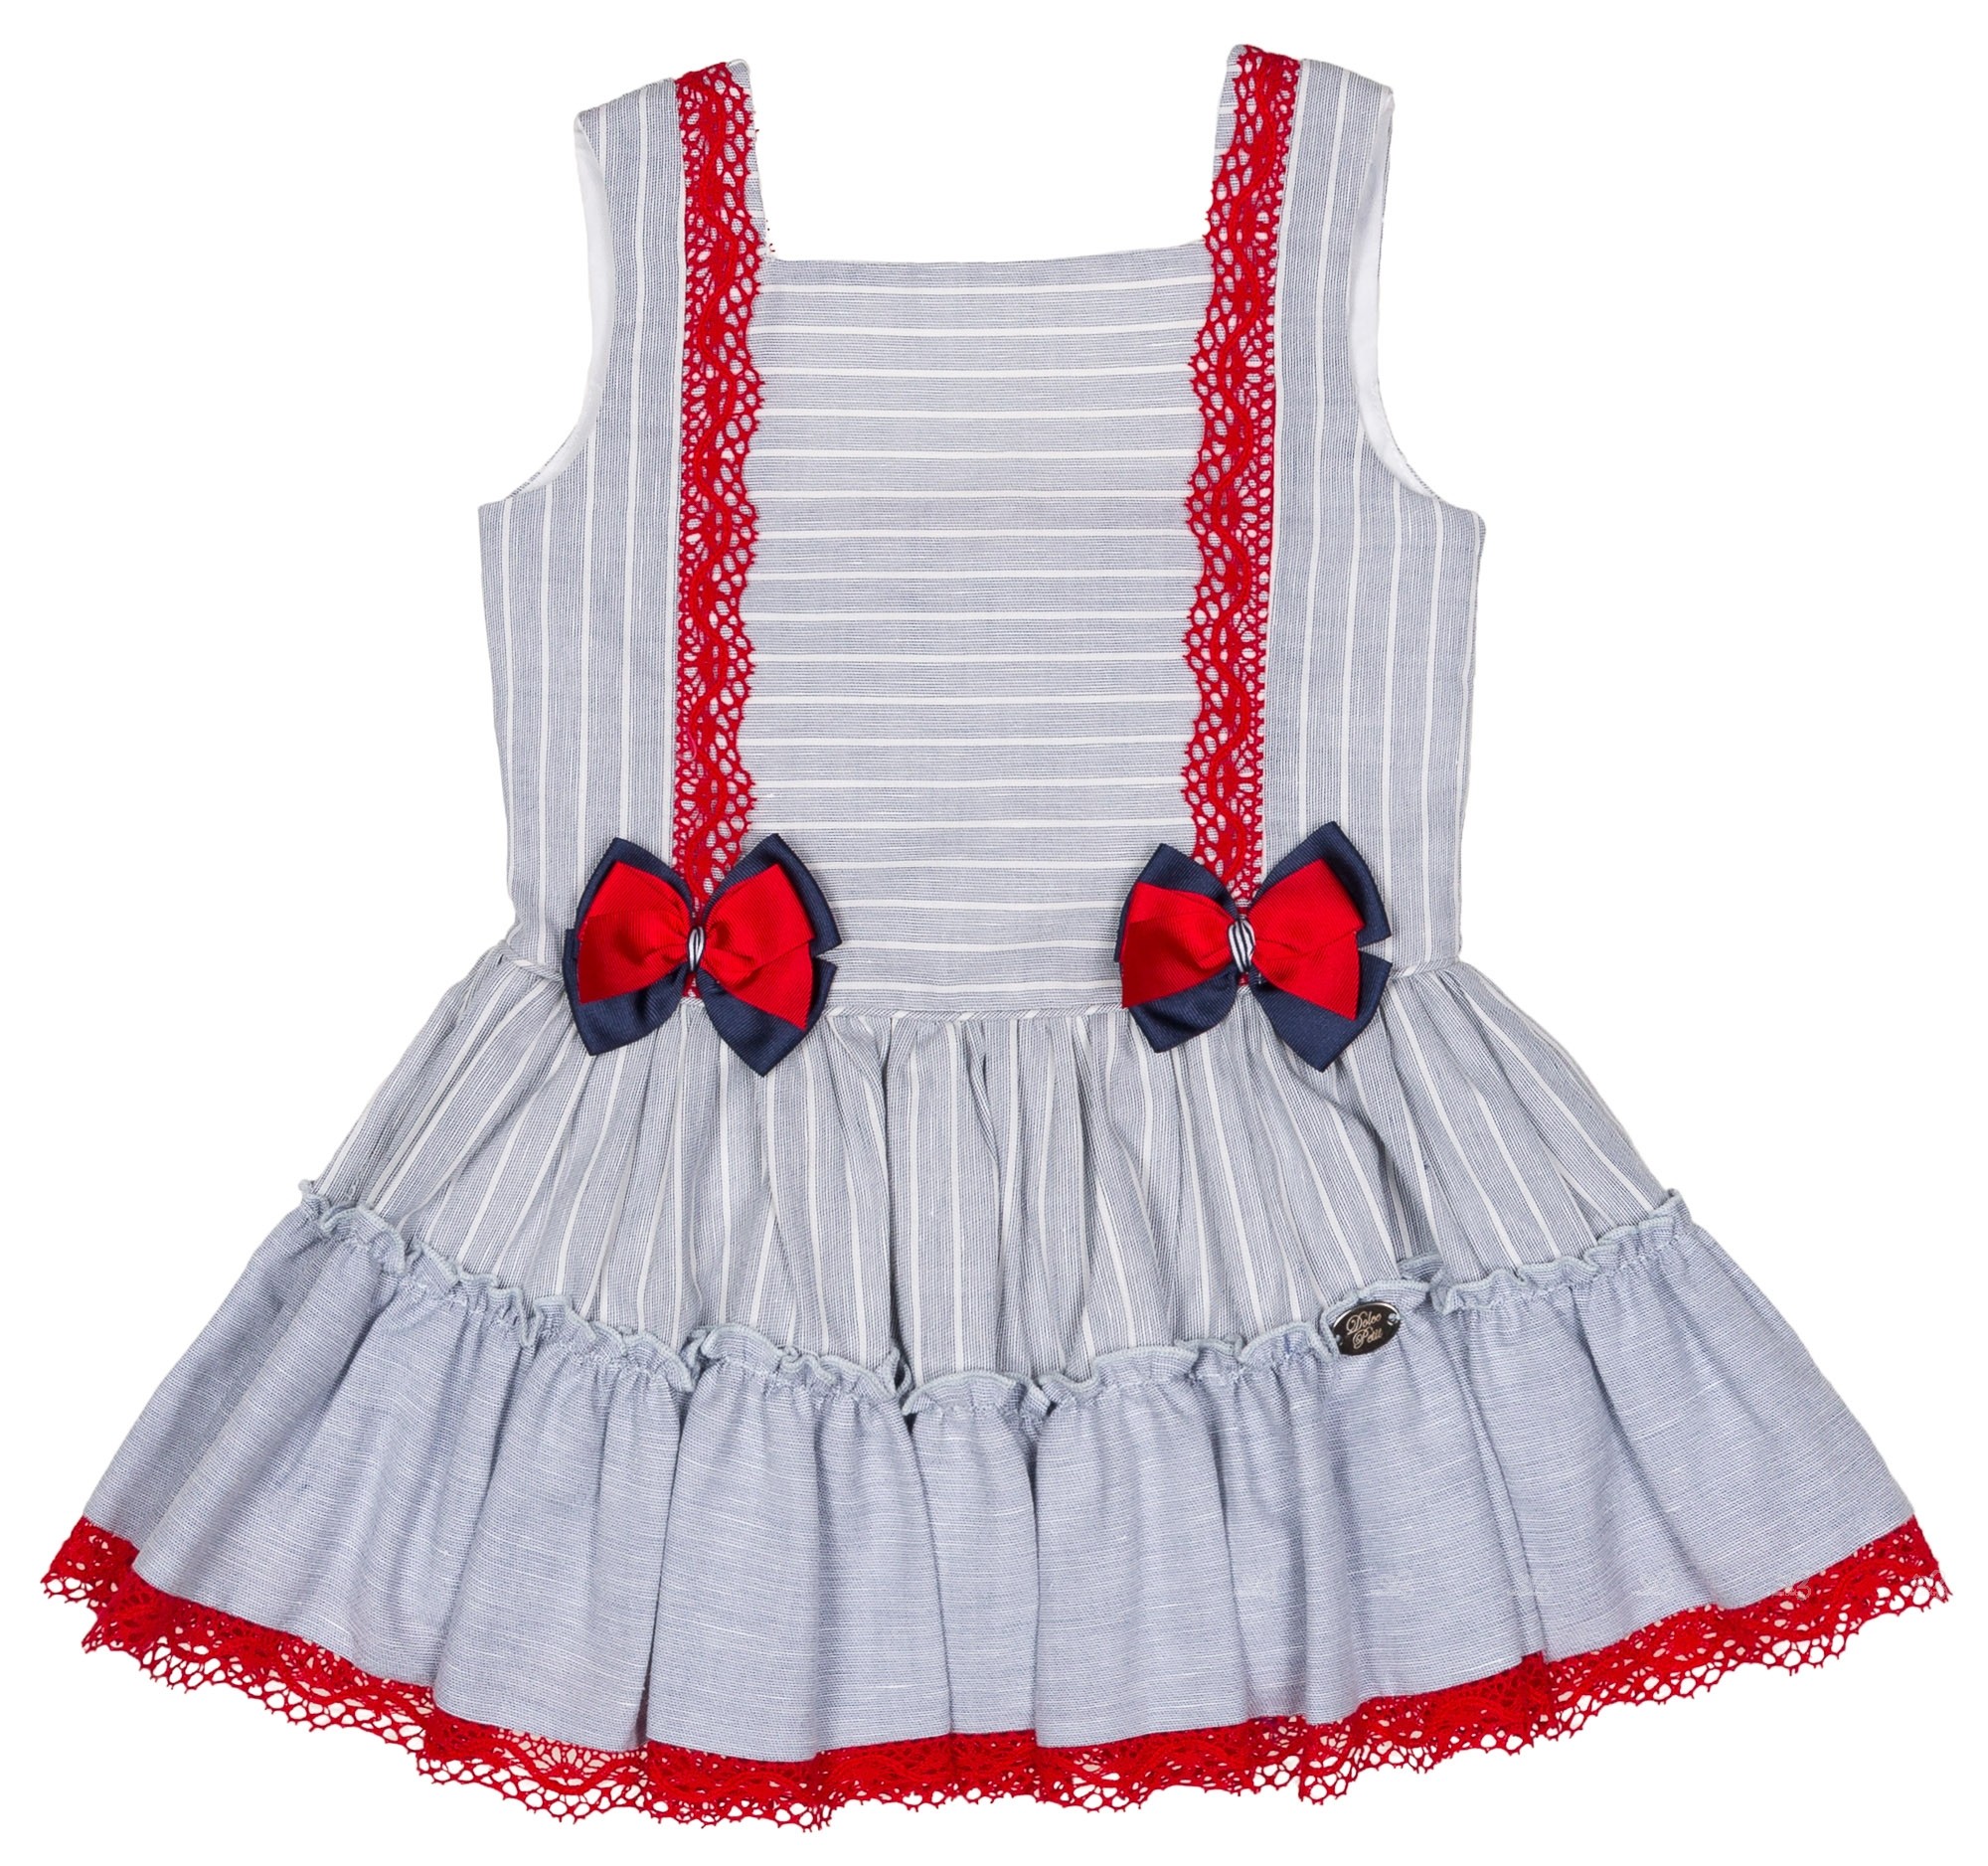 Dolce Petit Girls Denim Blue & White Striped Dress with Red Lace | Missbaby